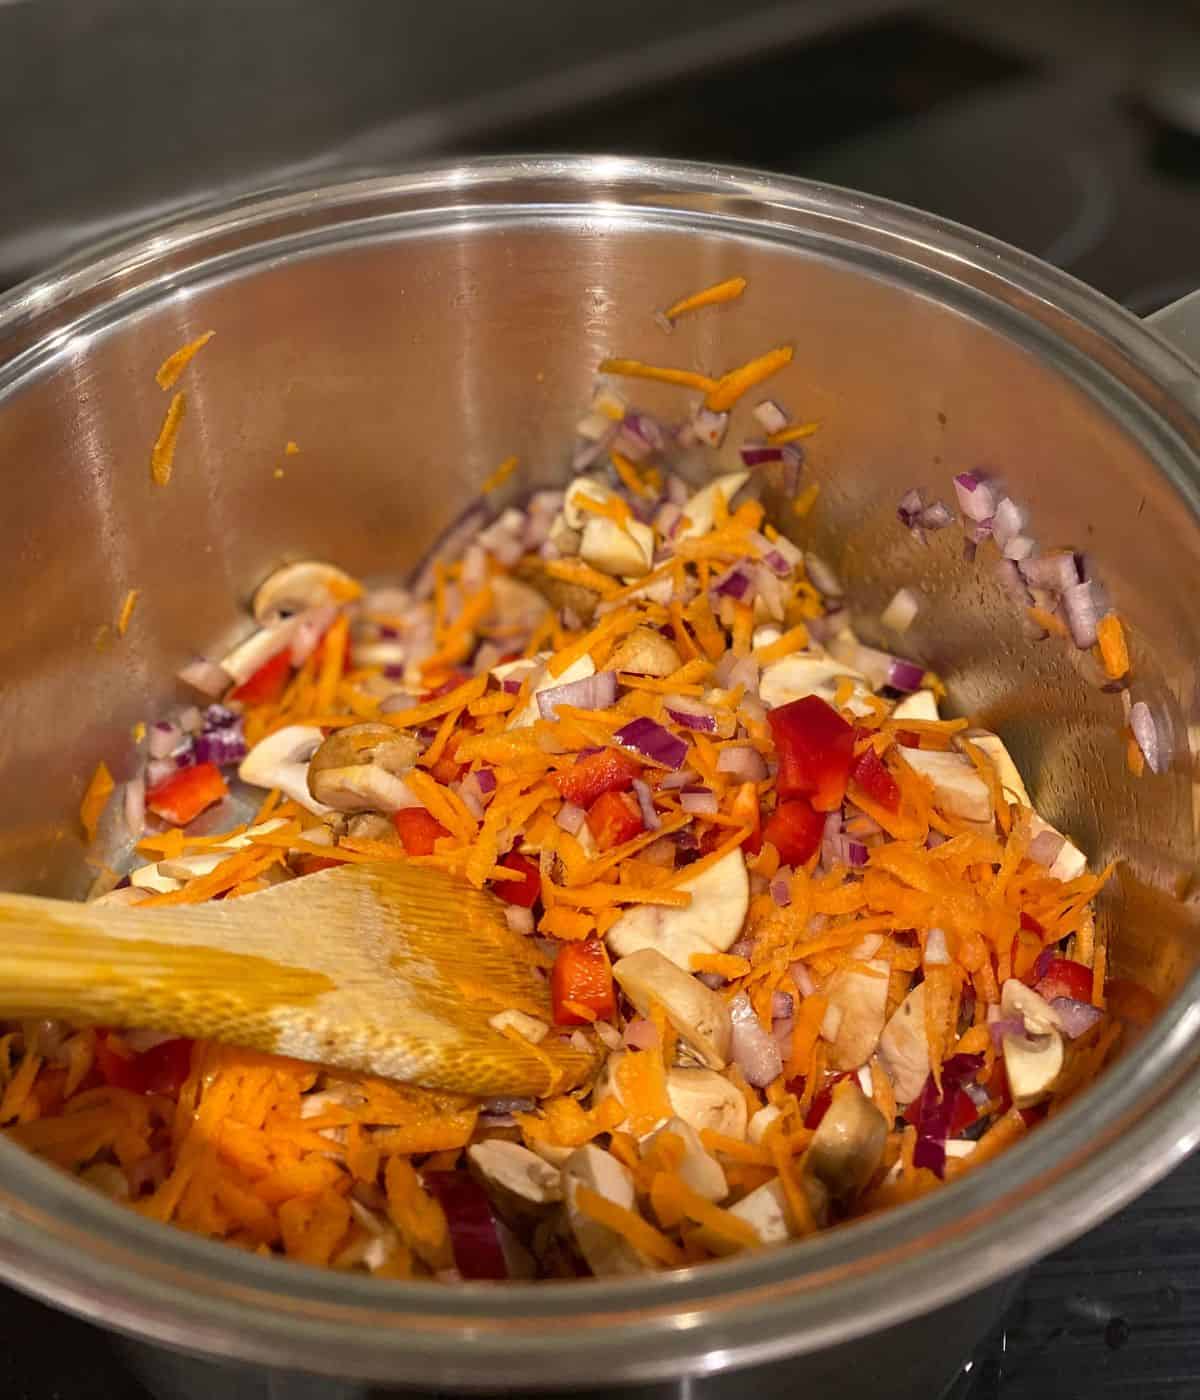 carrot, mushroom, onion and peppers sweating in a saucepan, being stirred with a wooden spoon.